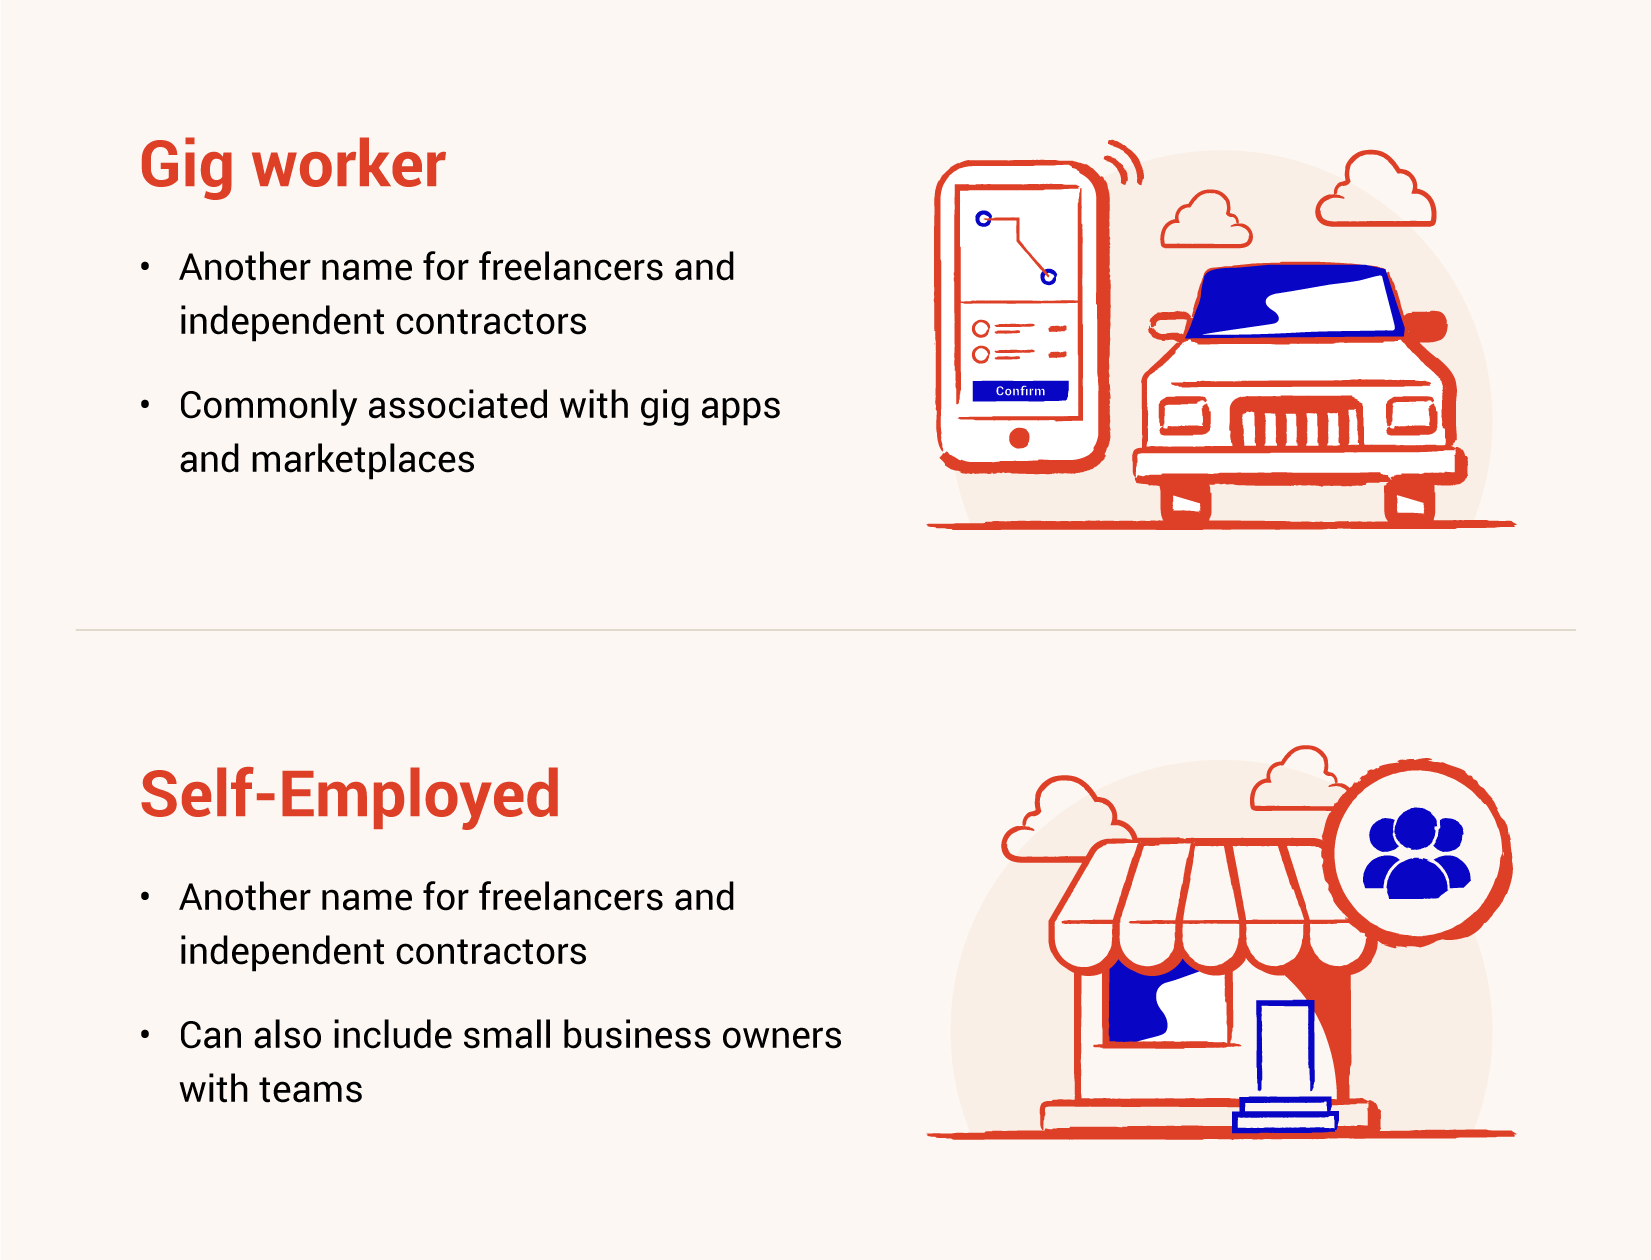 gig worker vs self-employed worker image